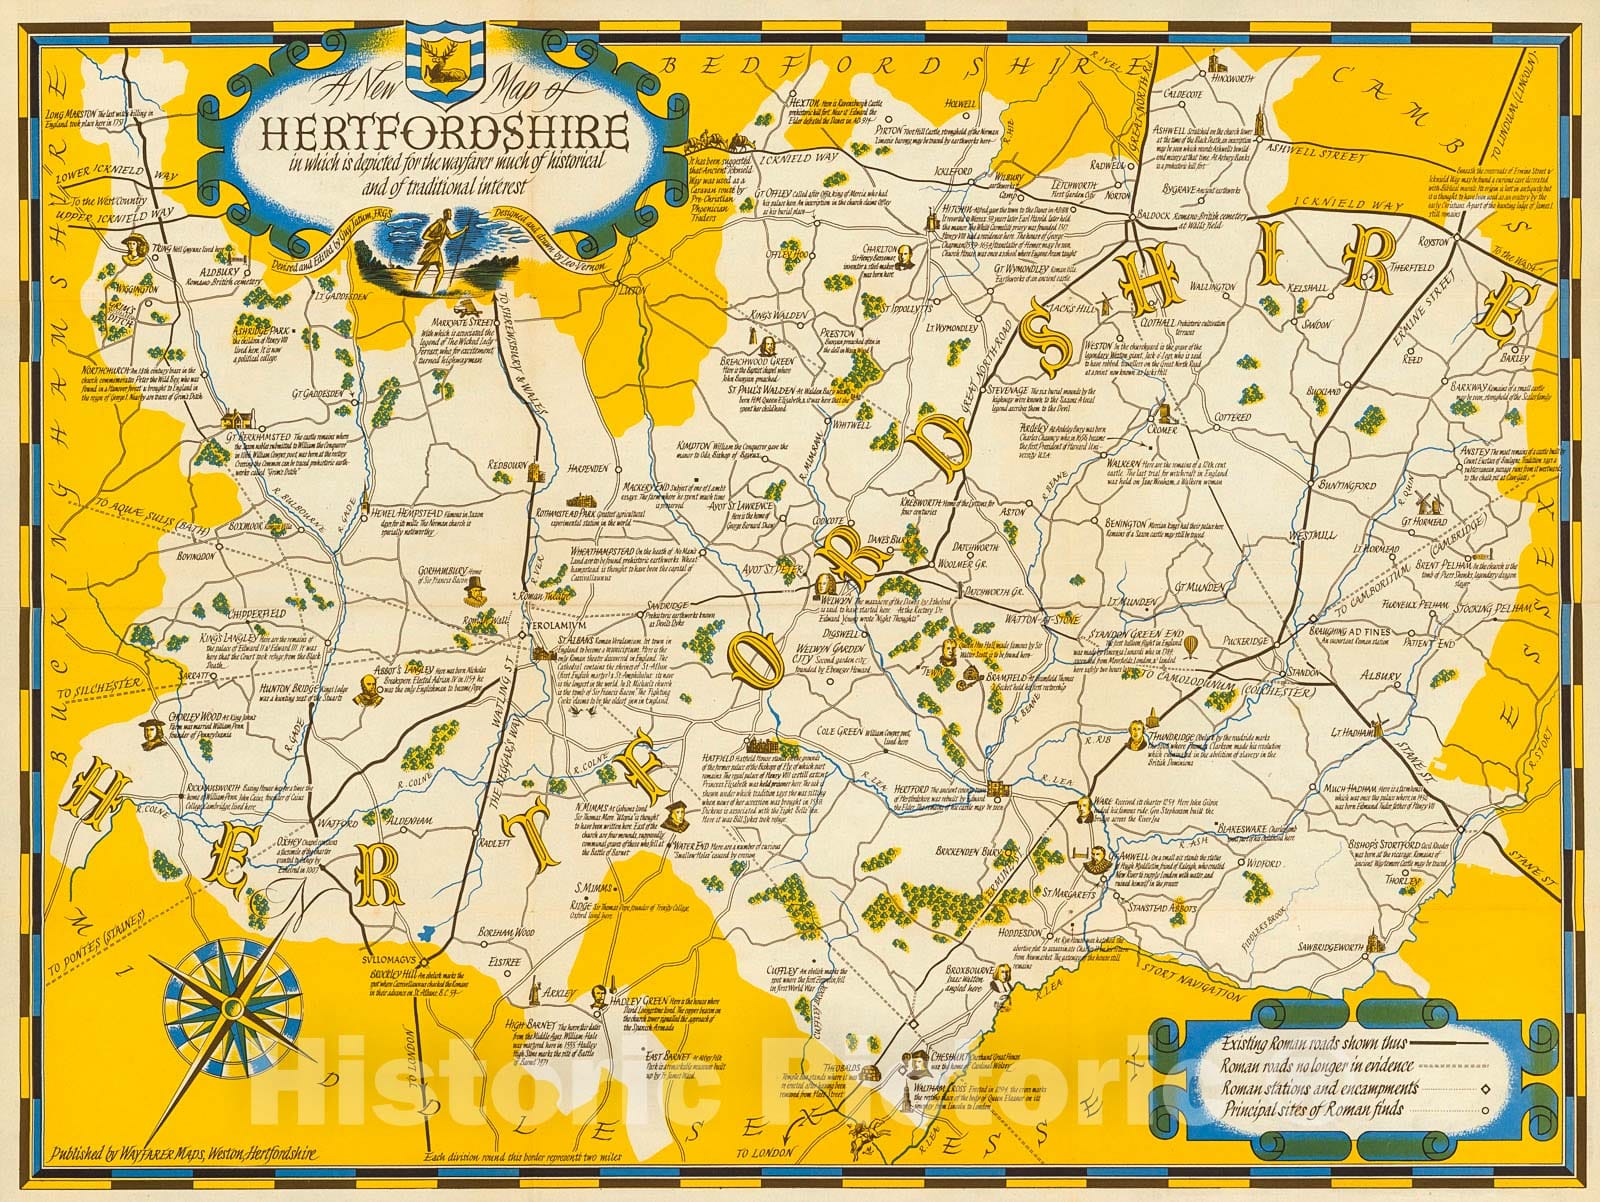 Historic Map : New Map of Hertfordshire in which is depicted for the wayfarer much of historical and traditional interest., 1950, Vintage Wall Decor